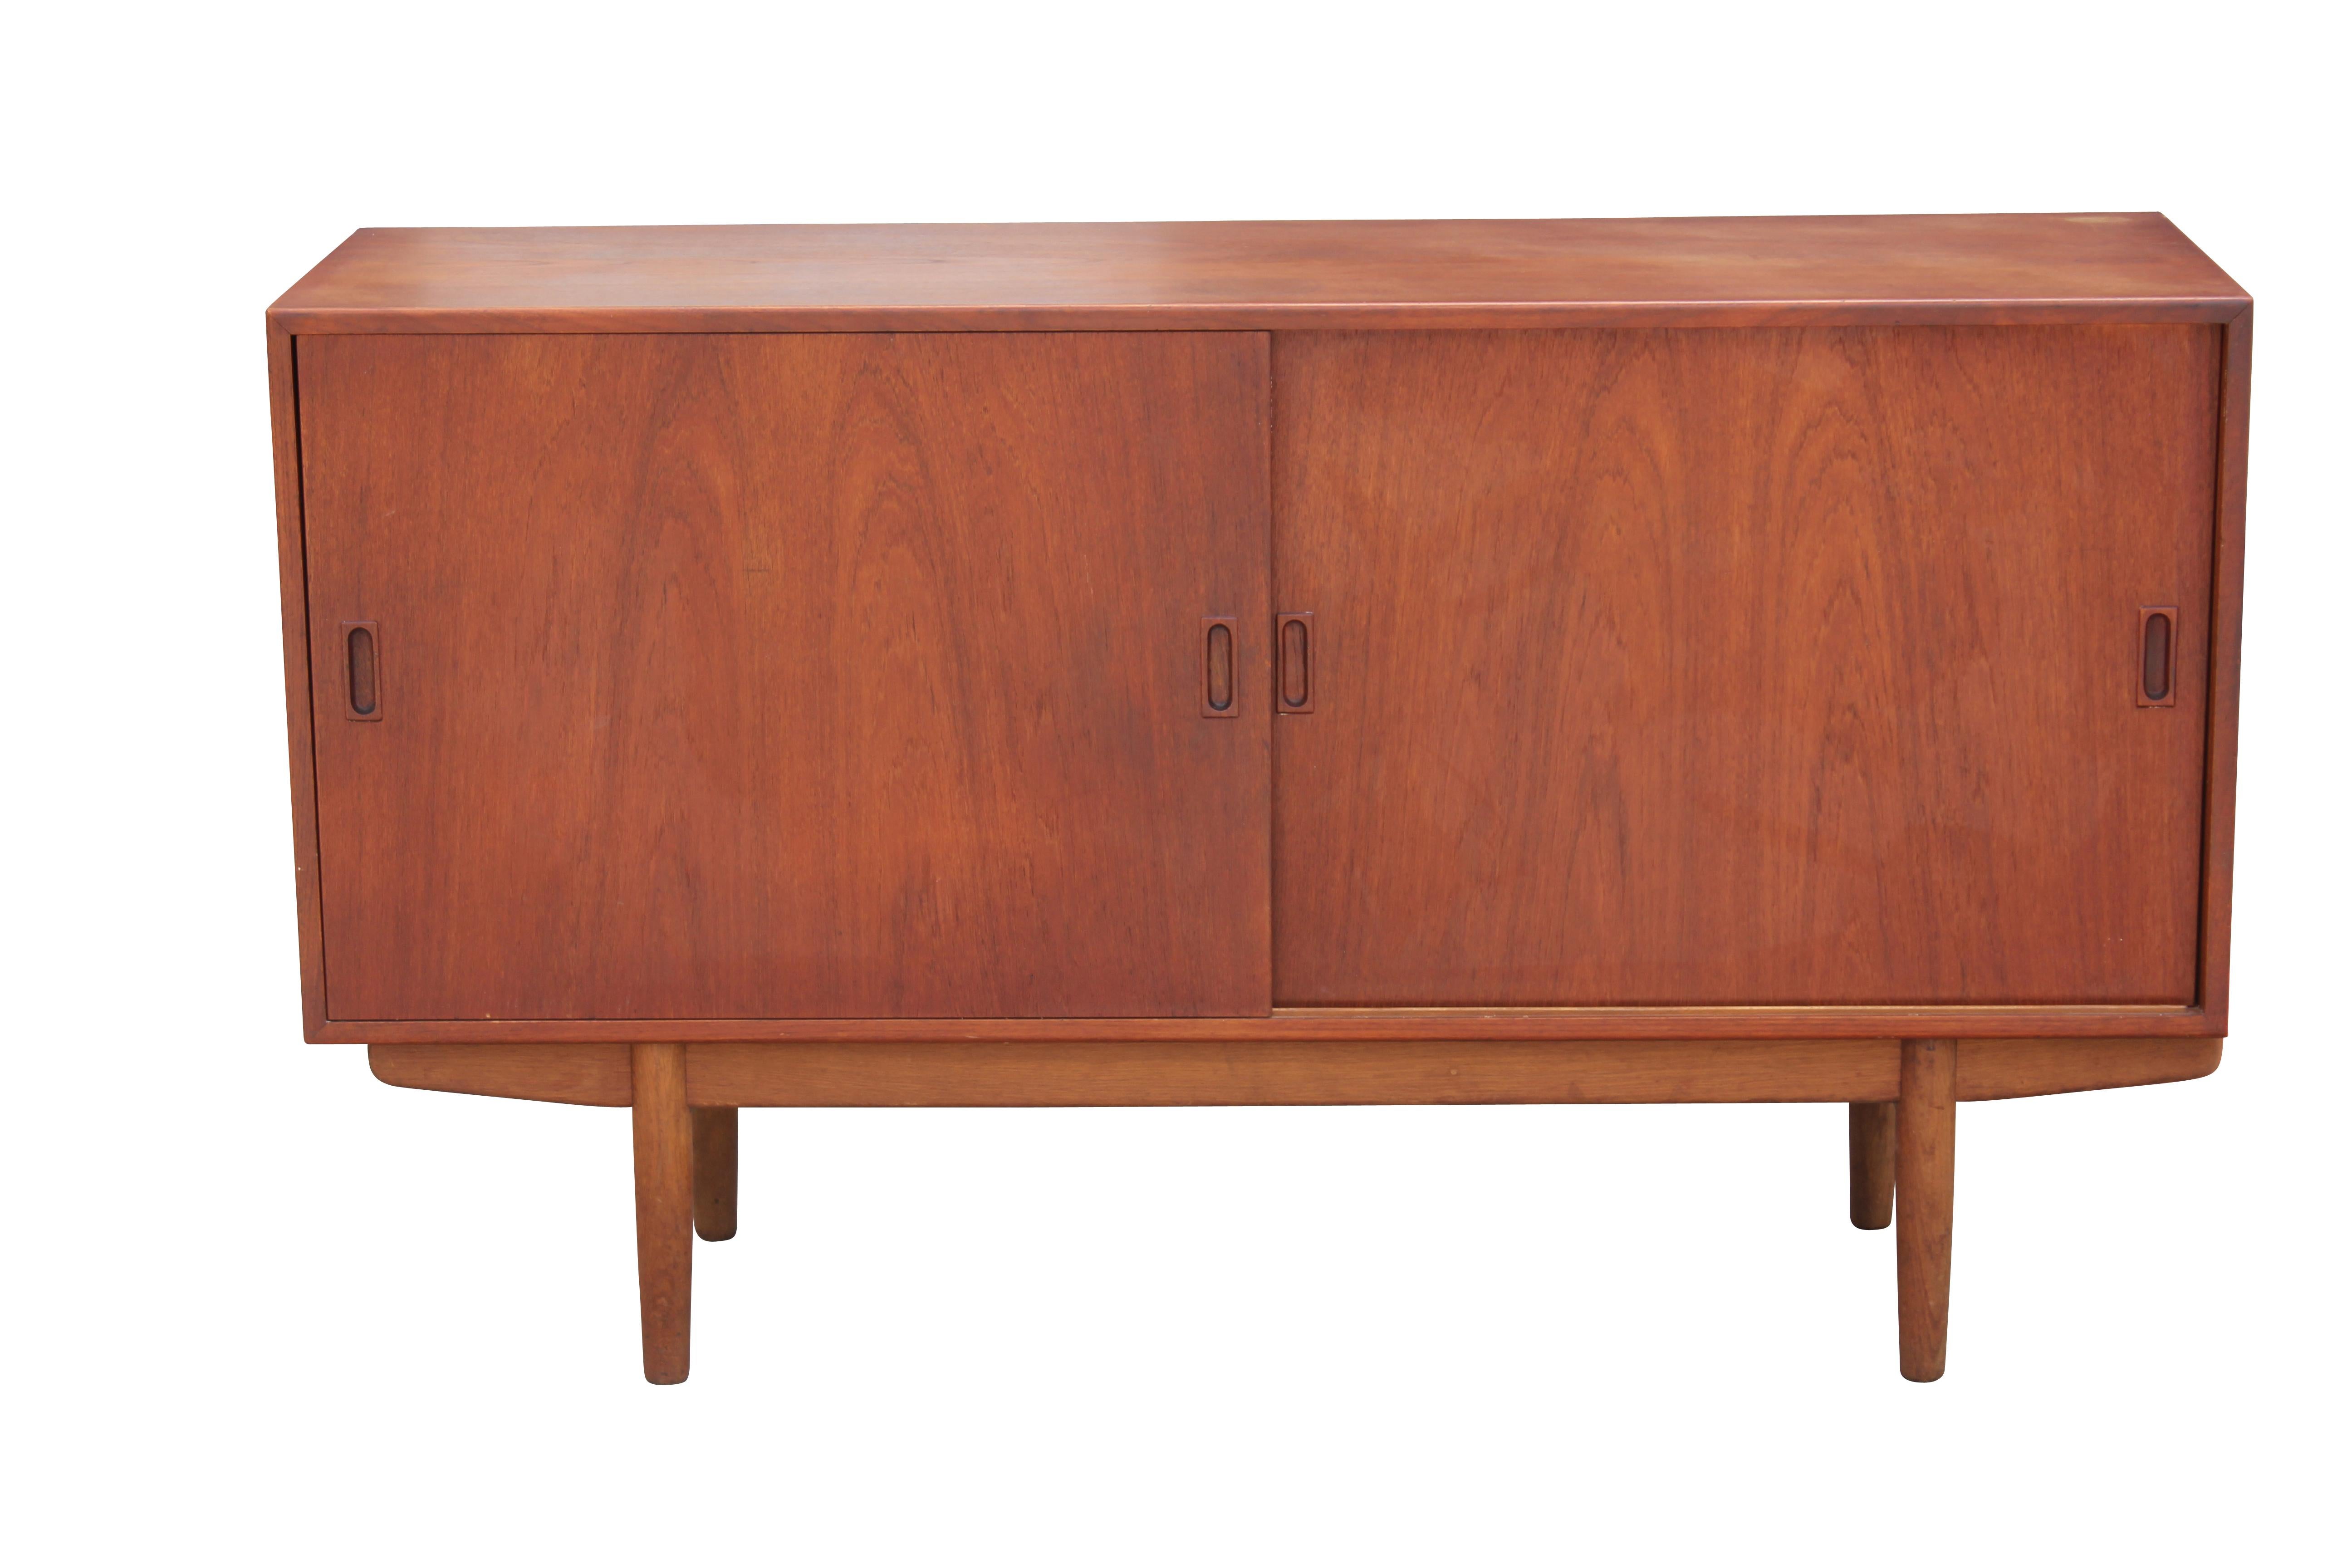 Gorgeous Danish modern sliding door credenza or sideboard by Børge Mogensen. The sliding doors open to reveal shelving on the left and four drawers on the right.